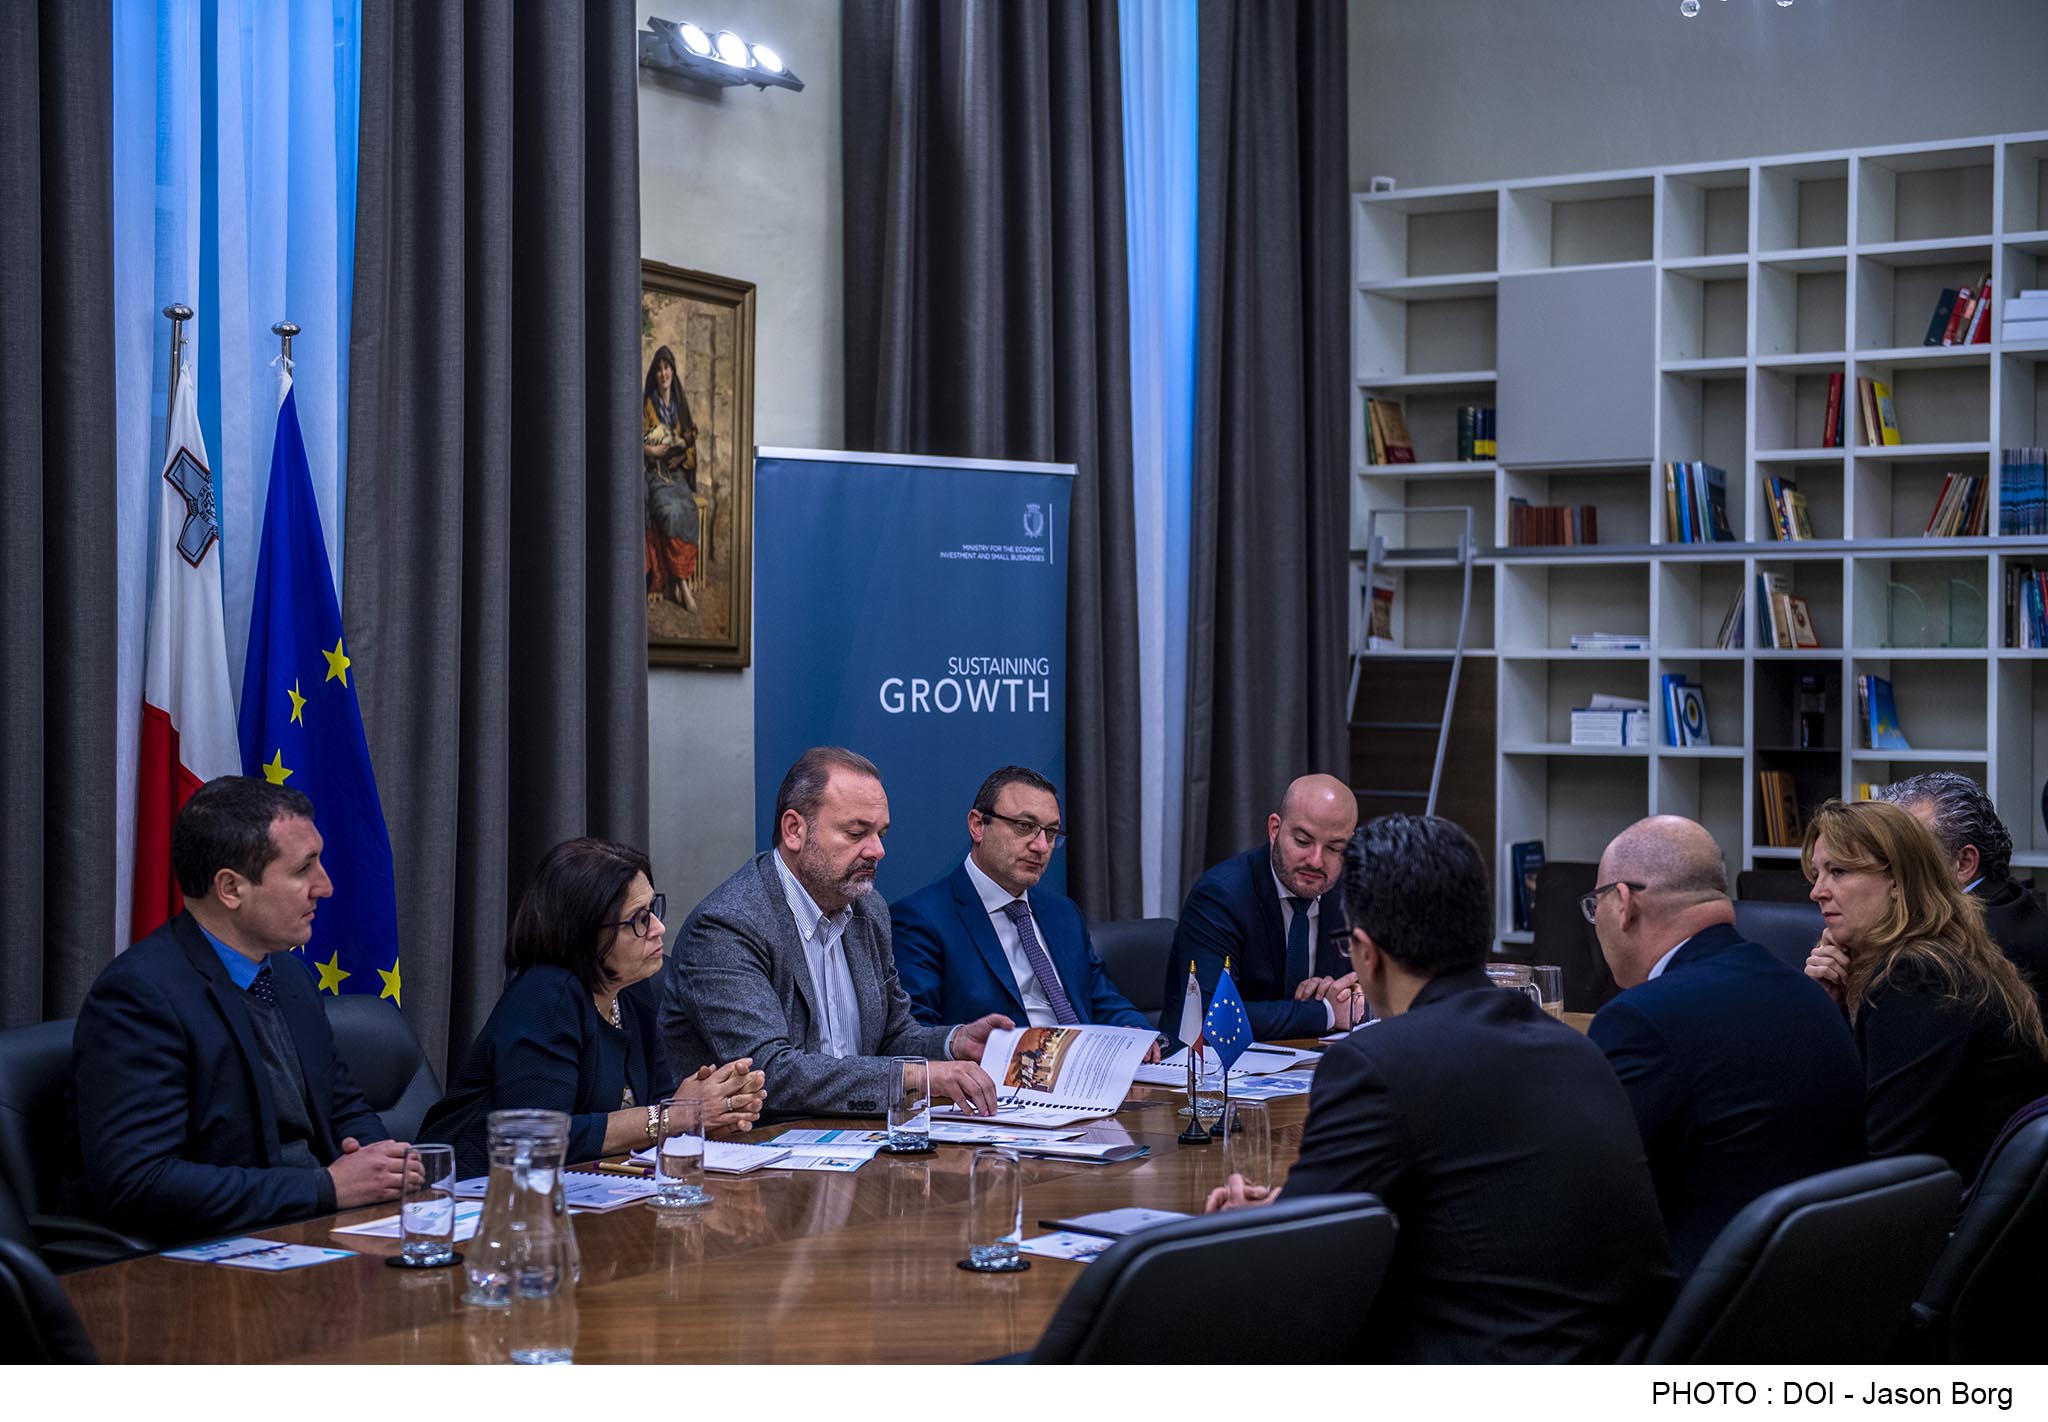 Malta's Local Action Plan presented to the Minister